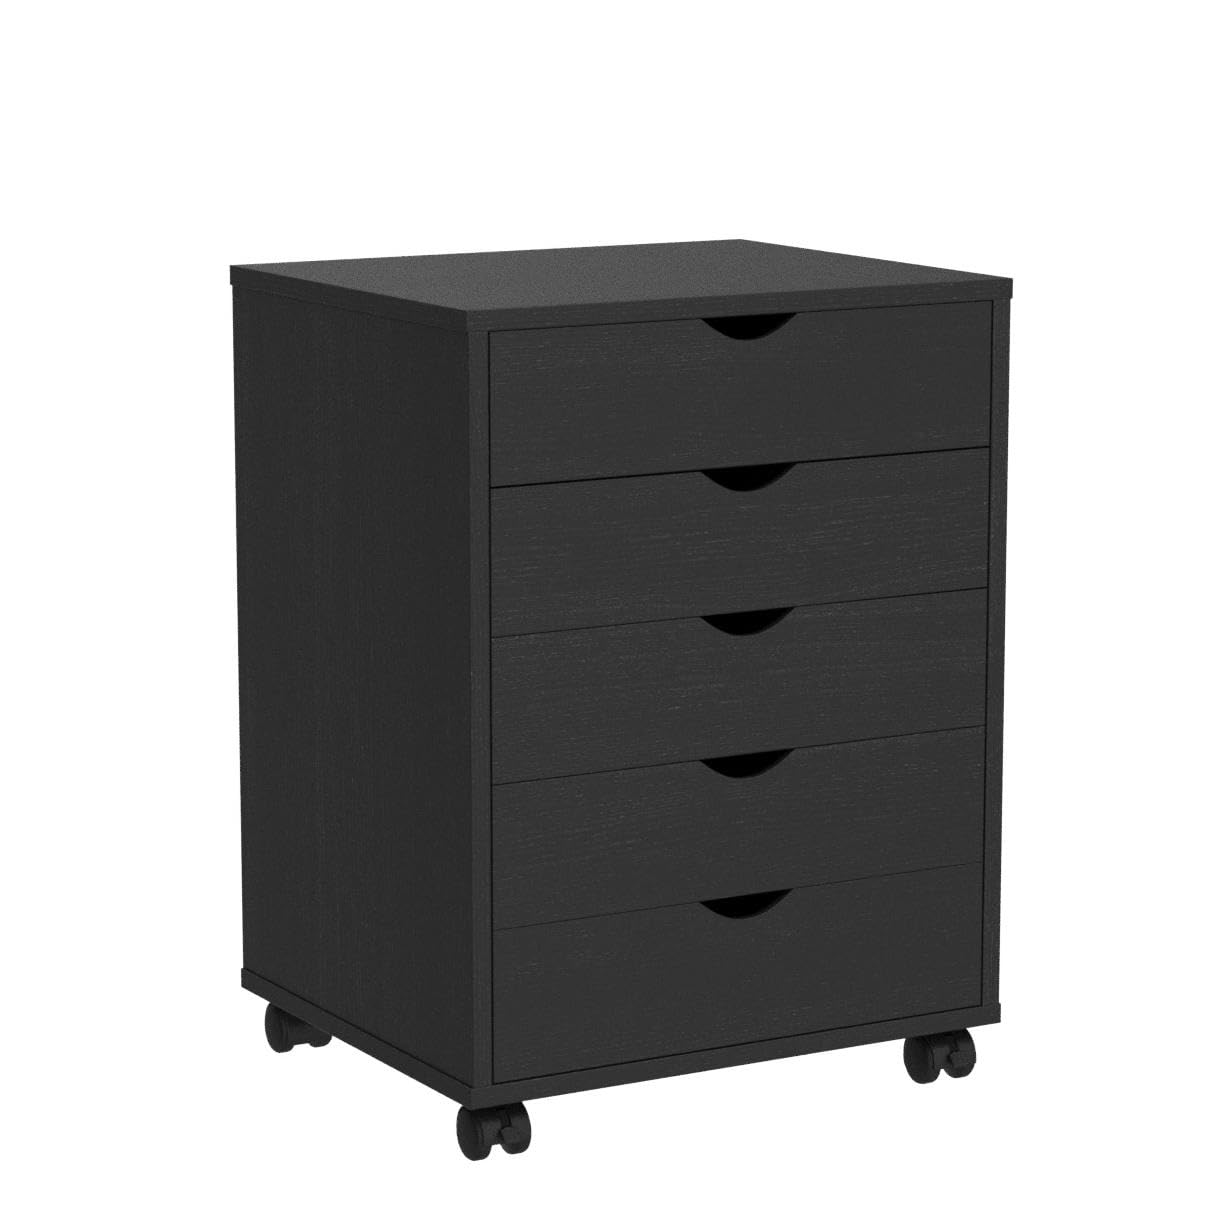 YITAHOME 5 Drawer Chest, Mobile File Cabinet with Wheels, Home Office Storage Dresser Cabinet, Black